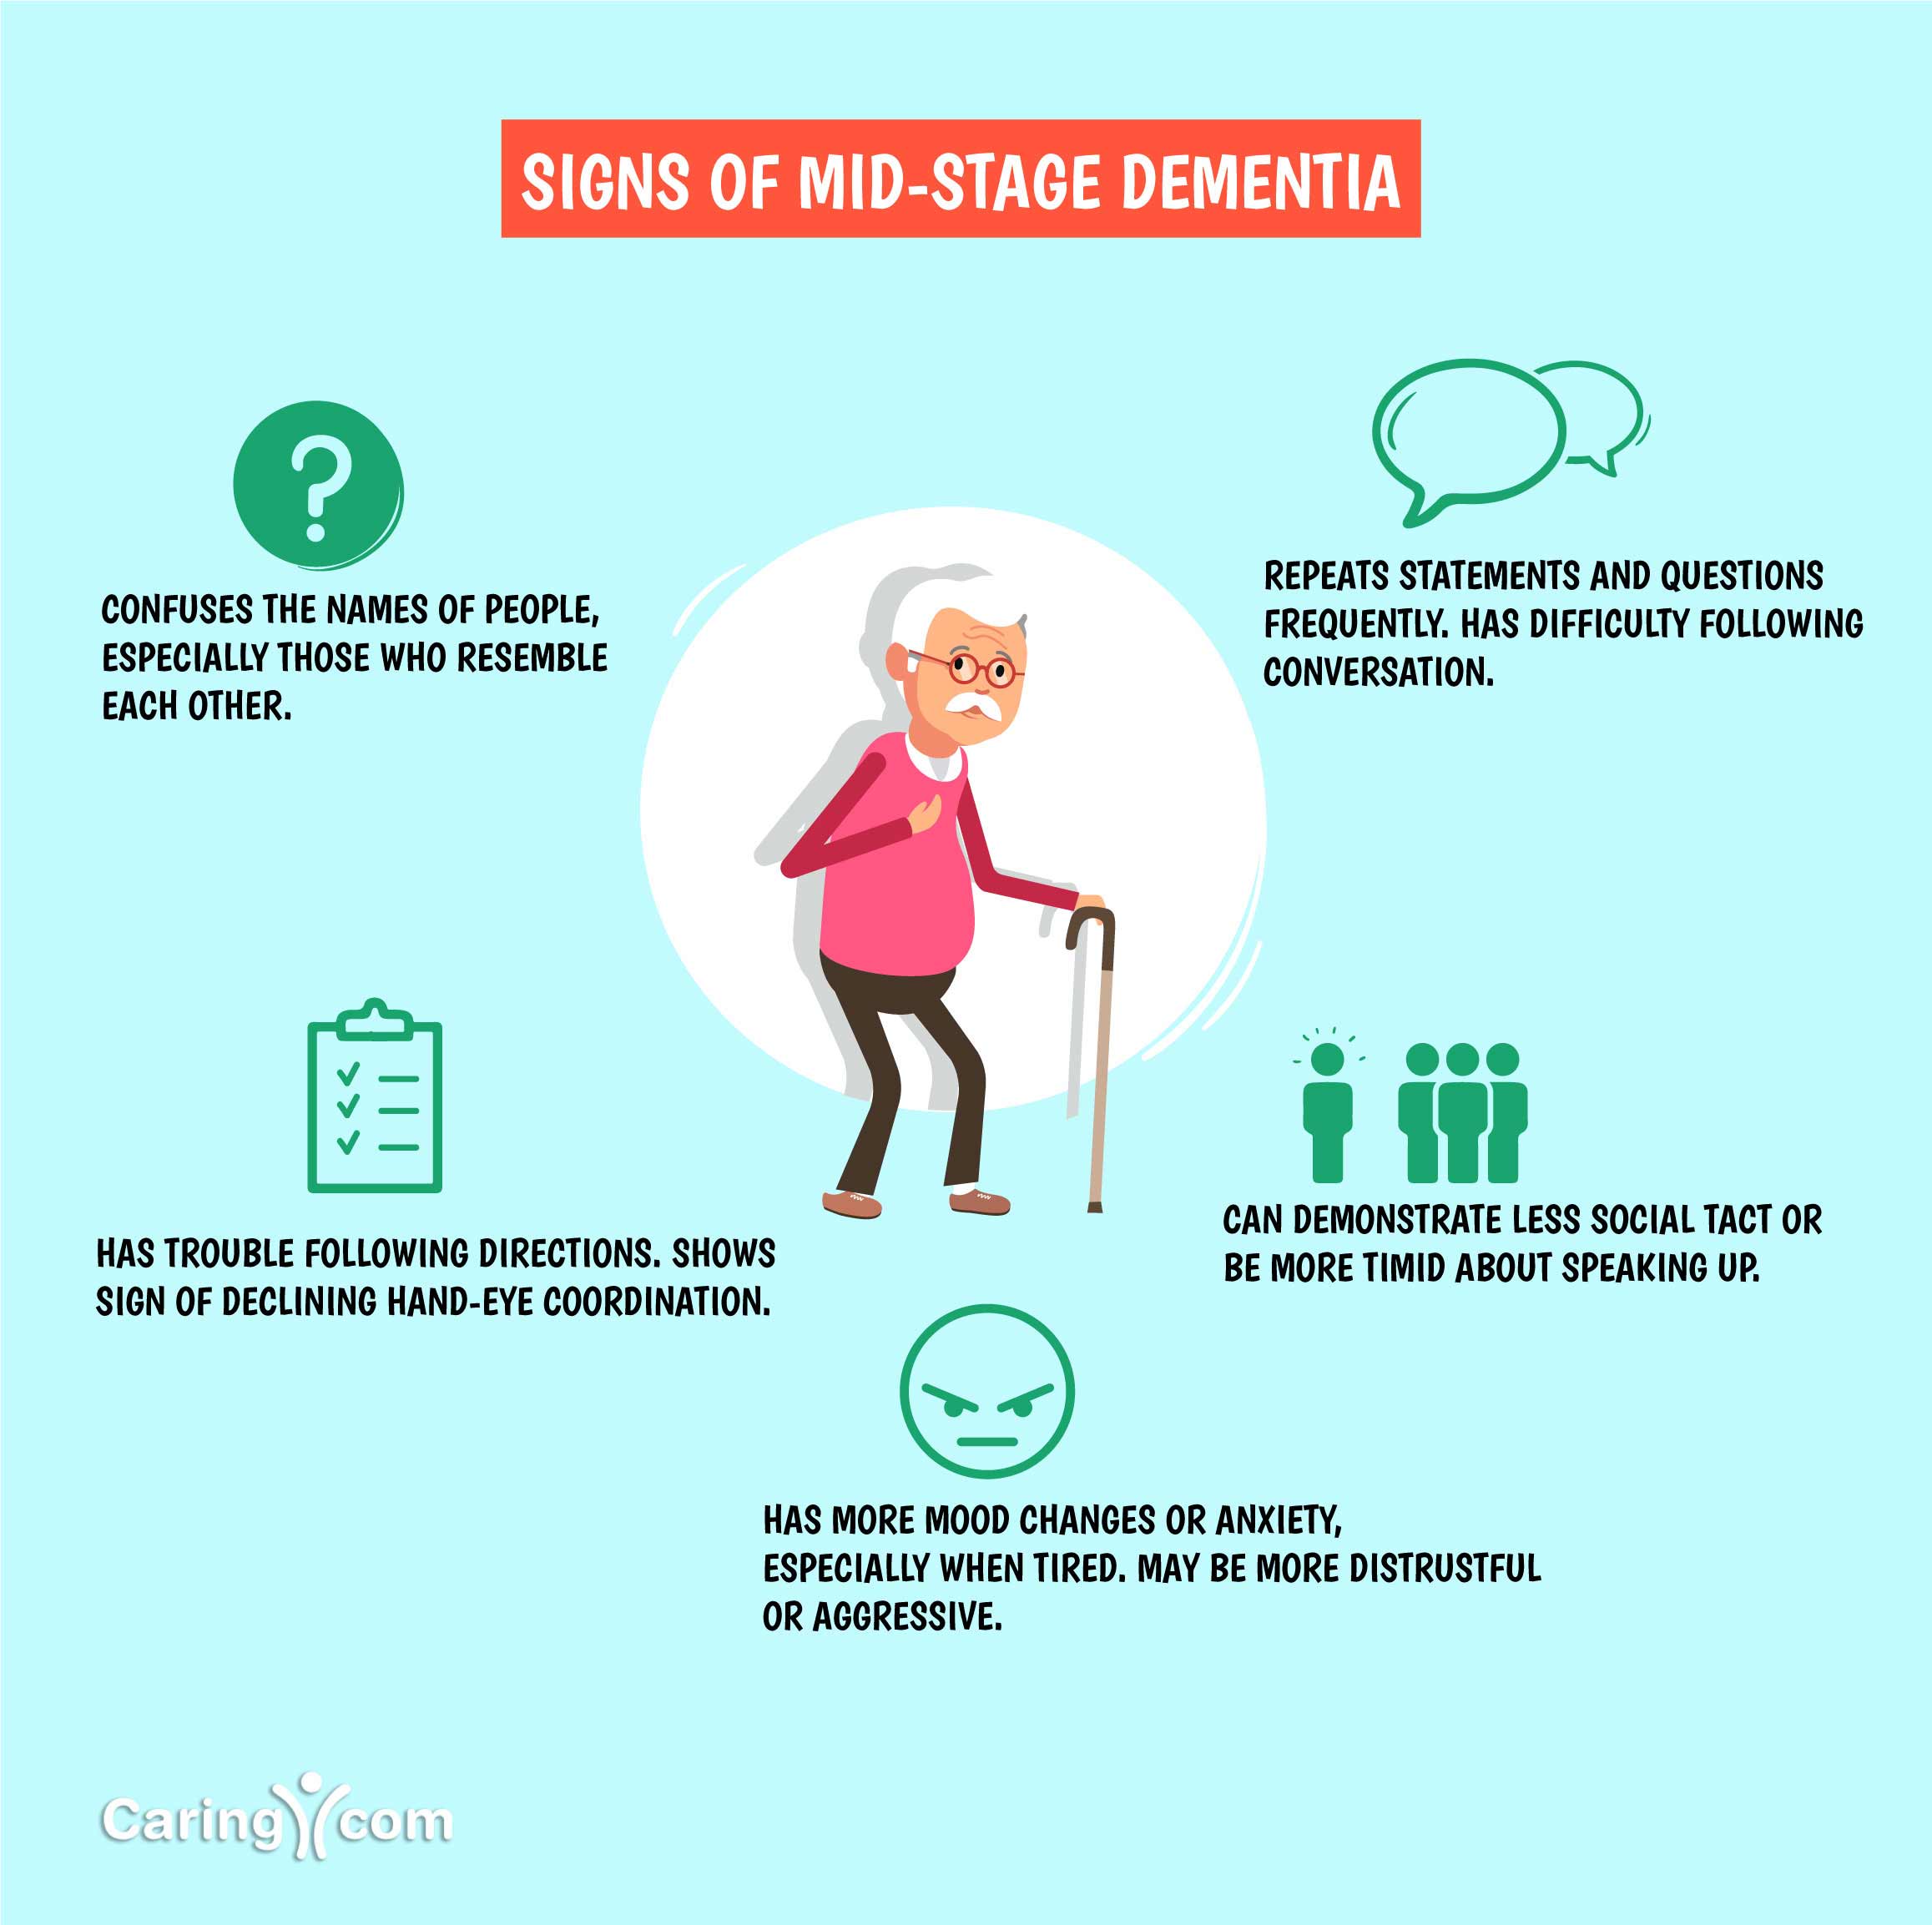 What Are Stages Of Dementia